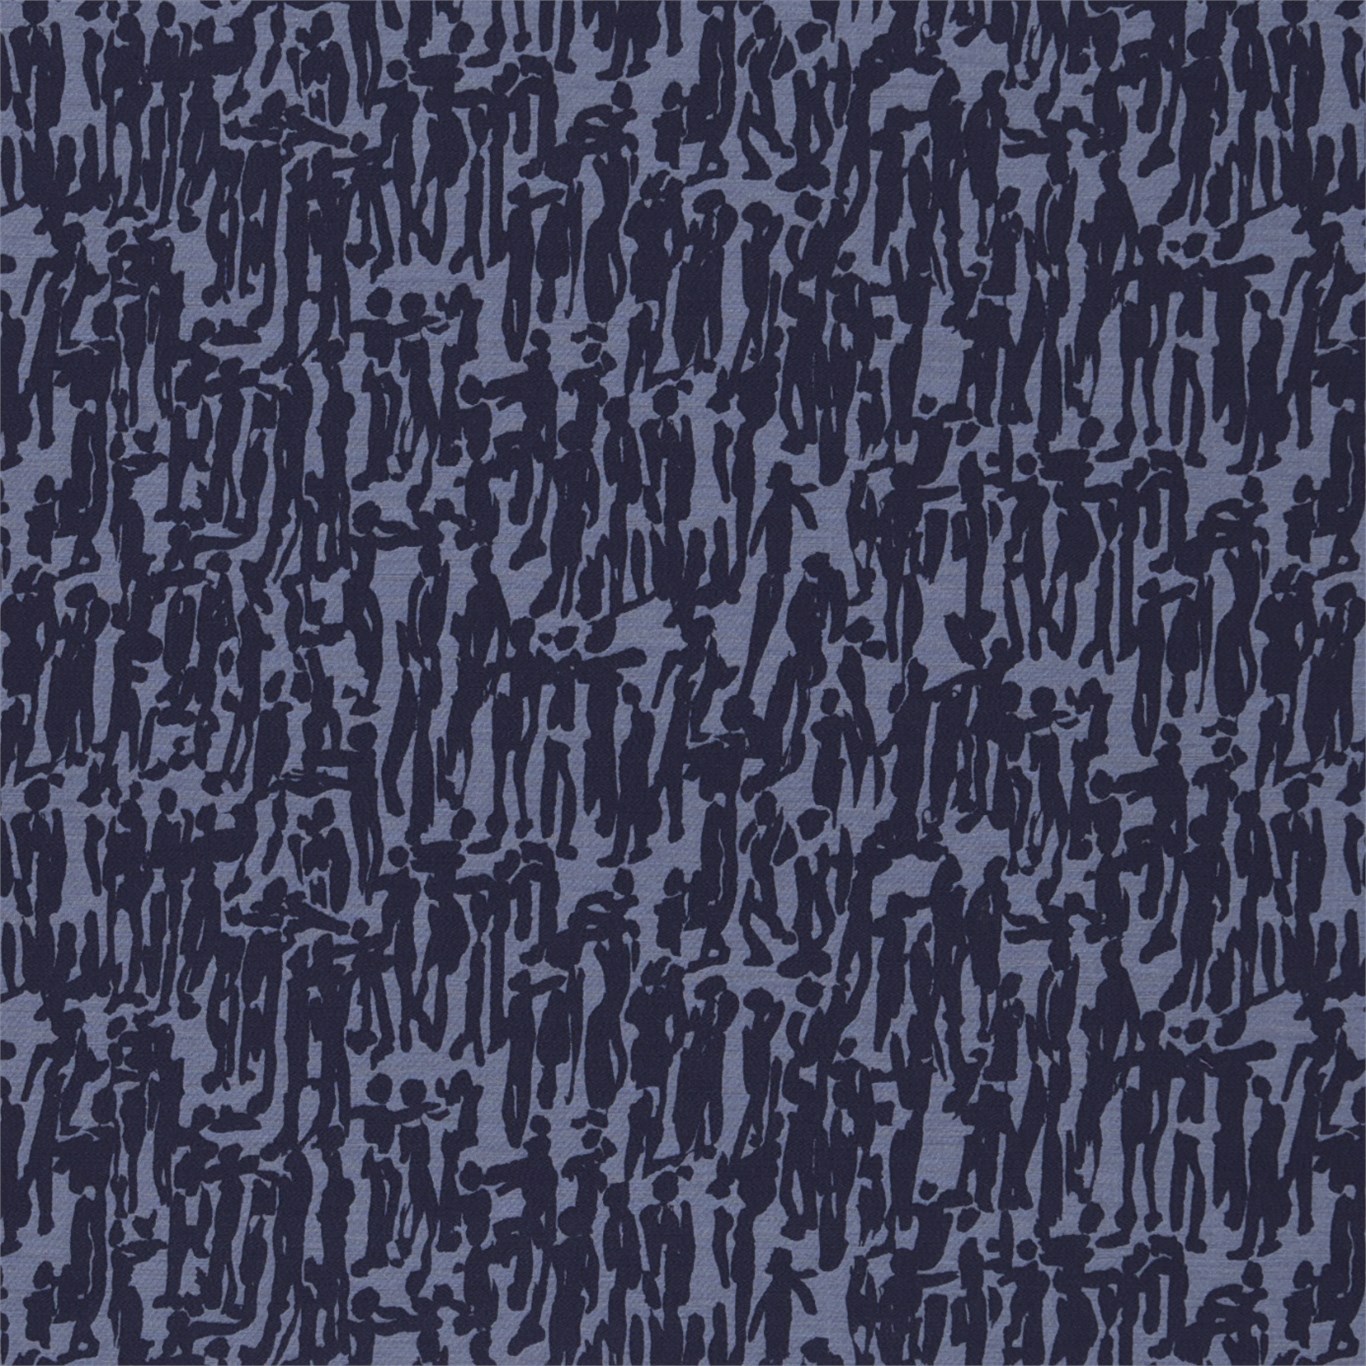 People Old Navy Denim Fabric by HAR